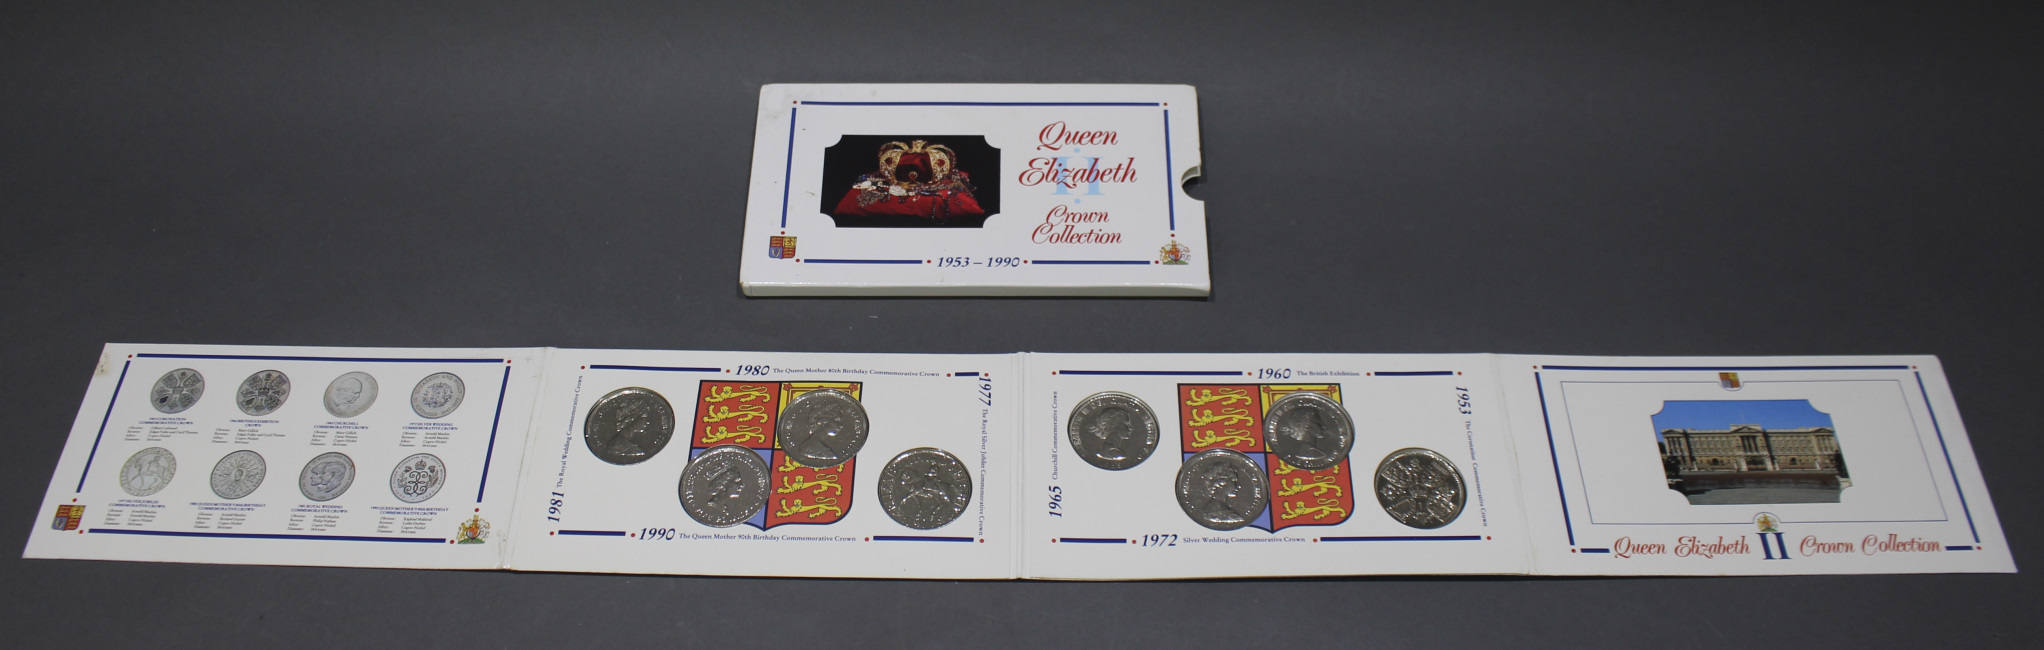 Queen Elizabeth 1953-1990 Crown Coin Collection - Image 8 of 8